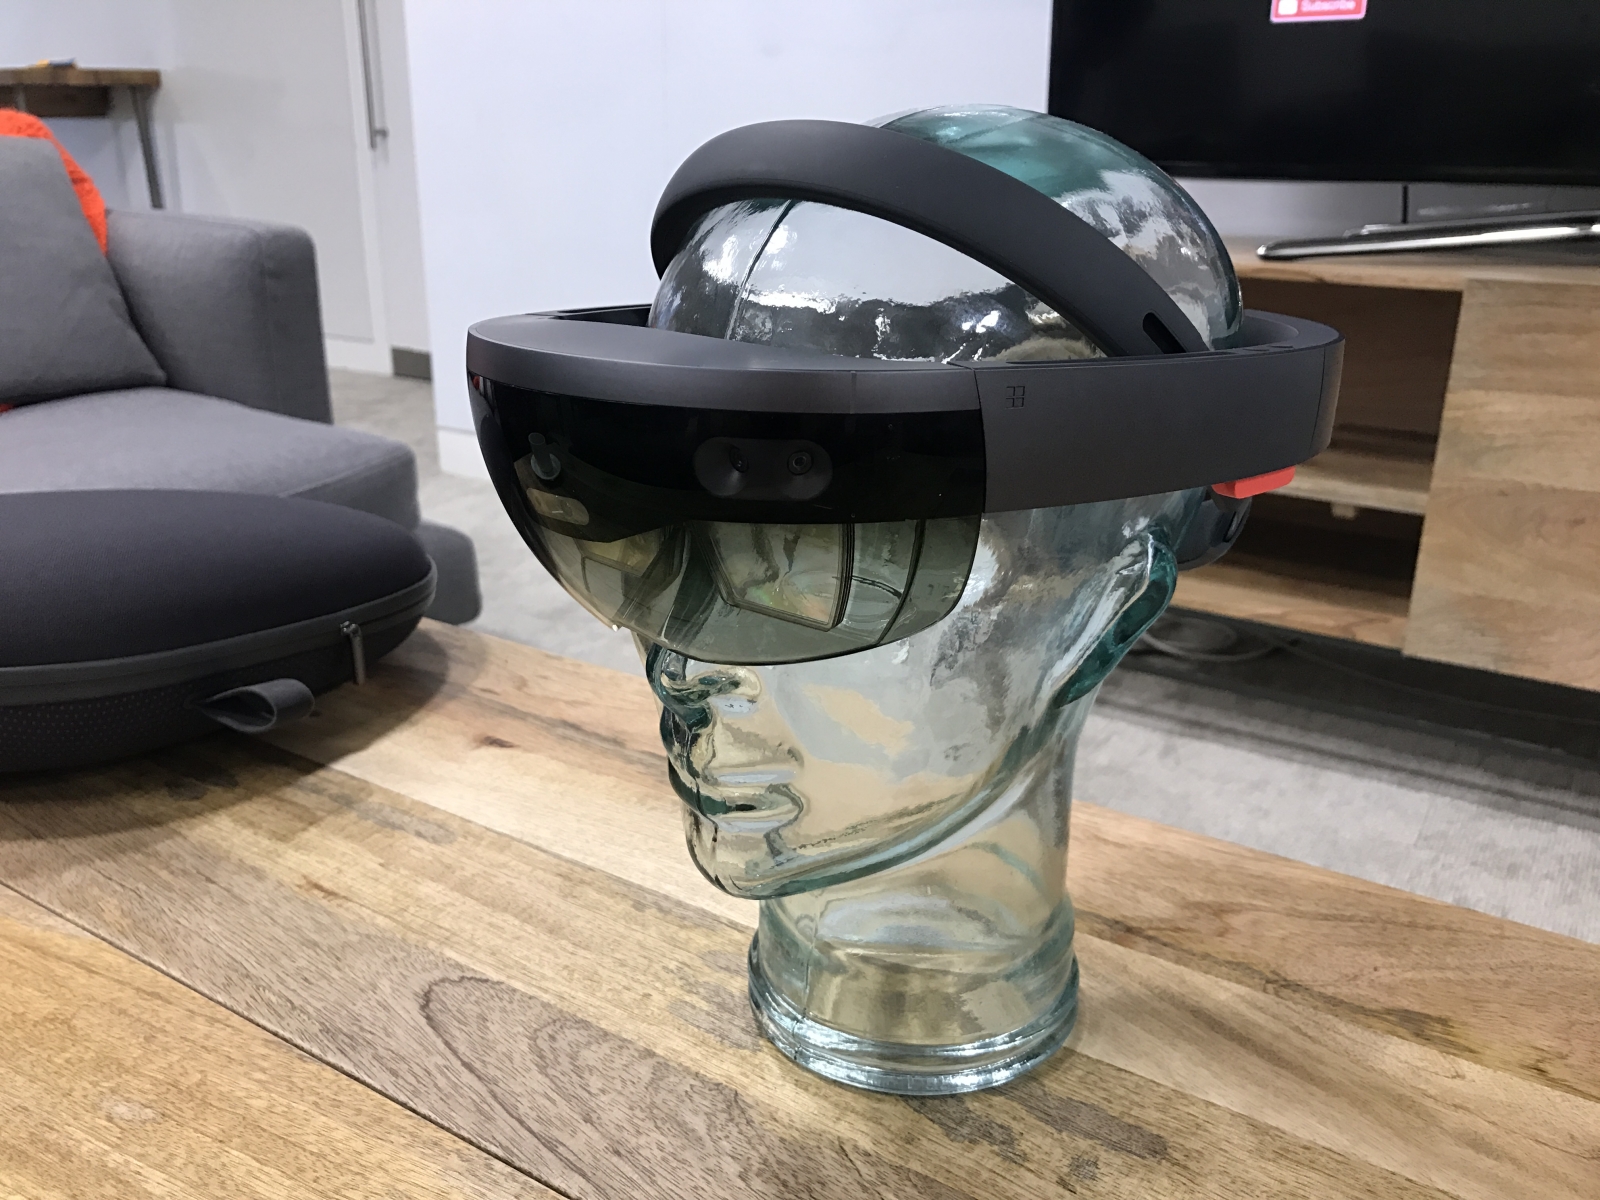 Microsoft HoloLens hands-on review: Is mixed reality the future?